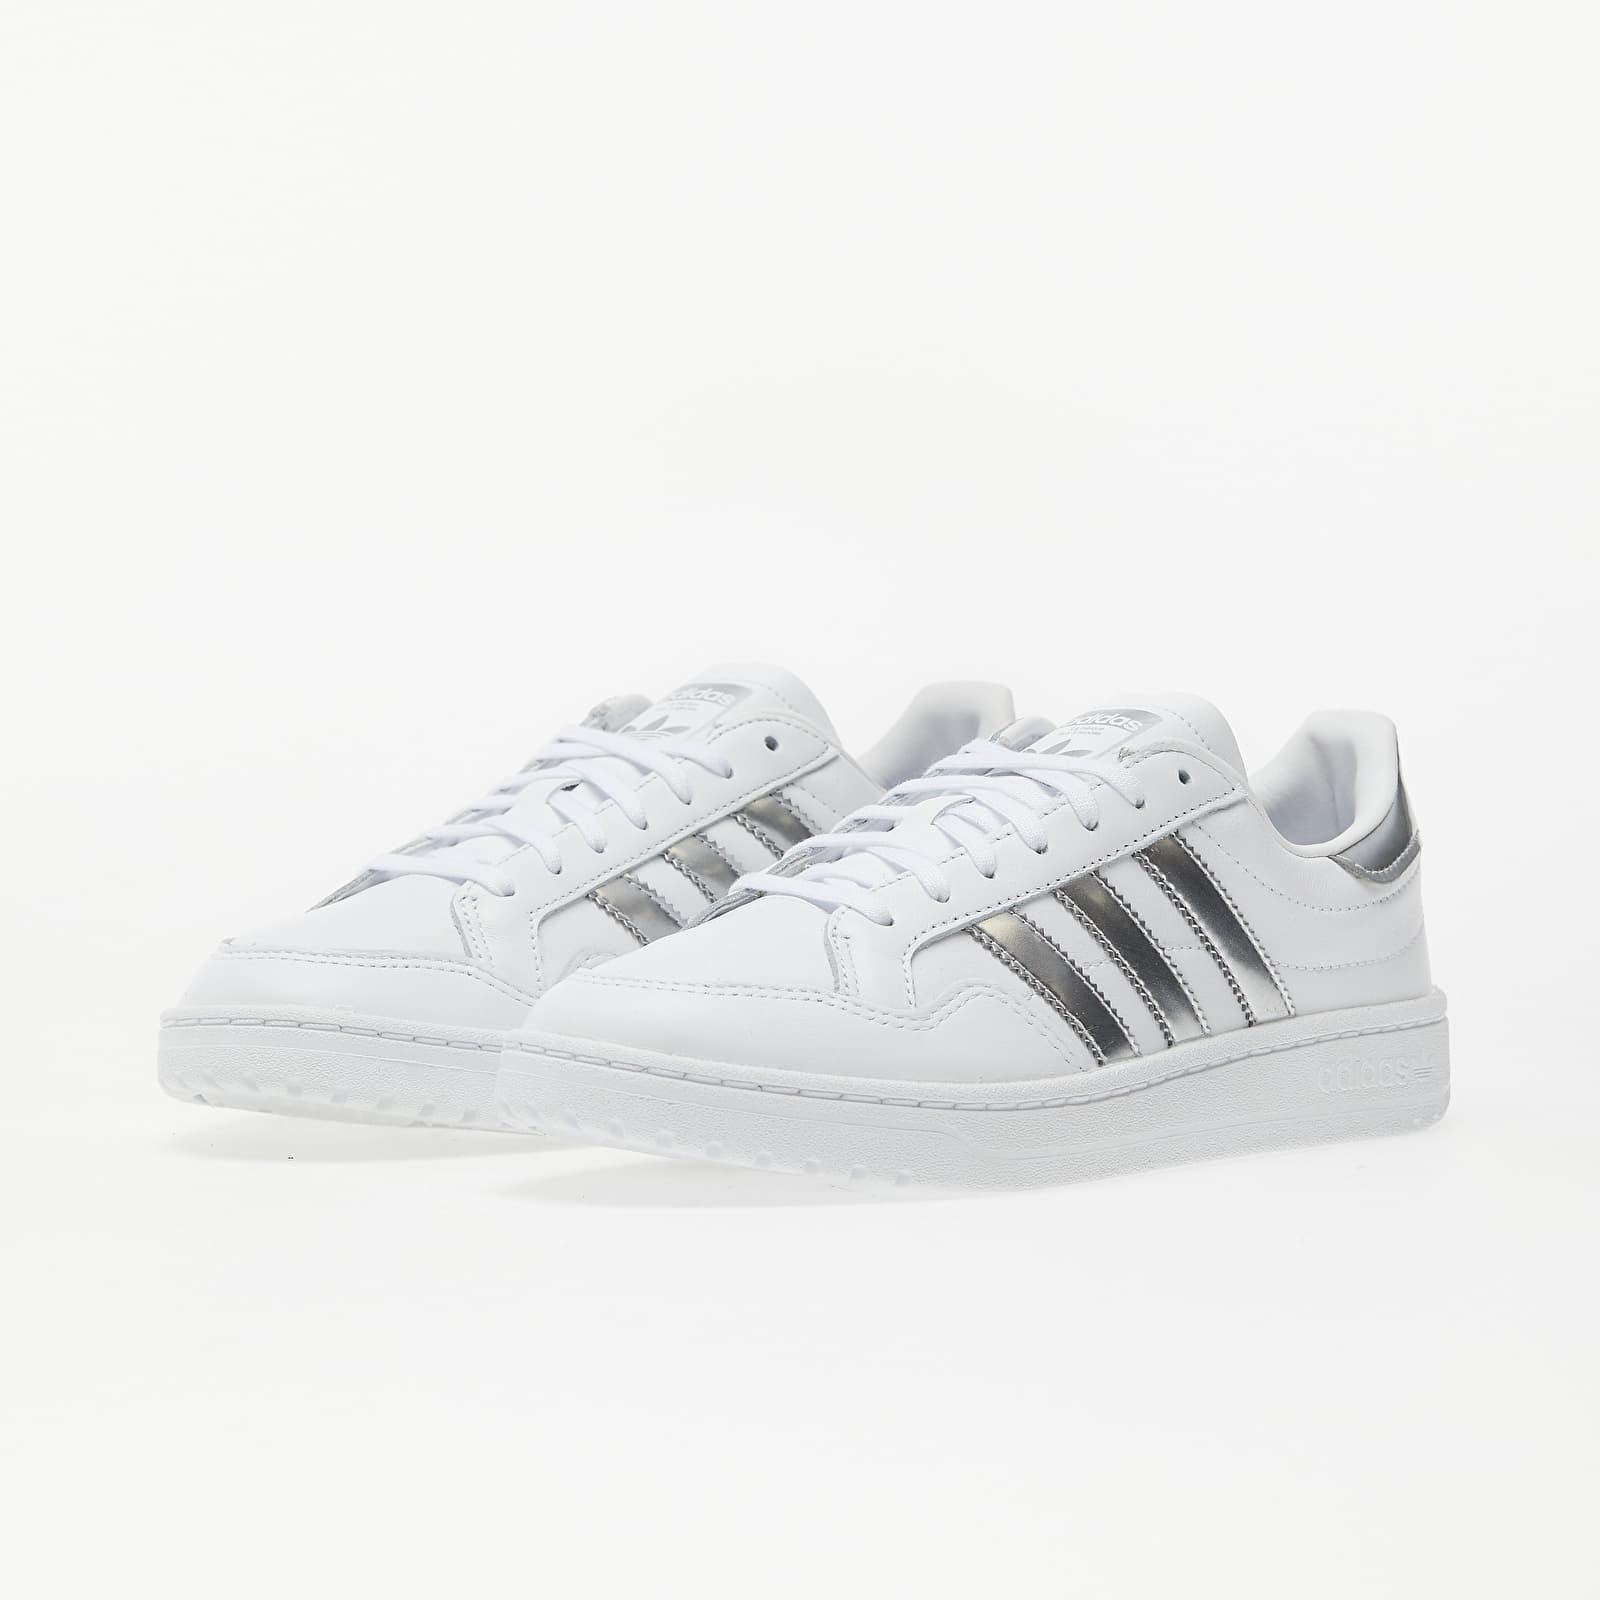 adidas Originals Leather Modern Court Sneakers in White/Silver (White) -  Save 46% - Lyst